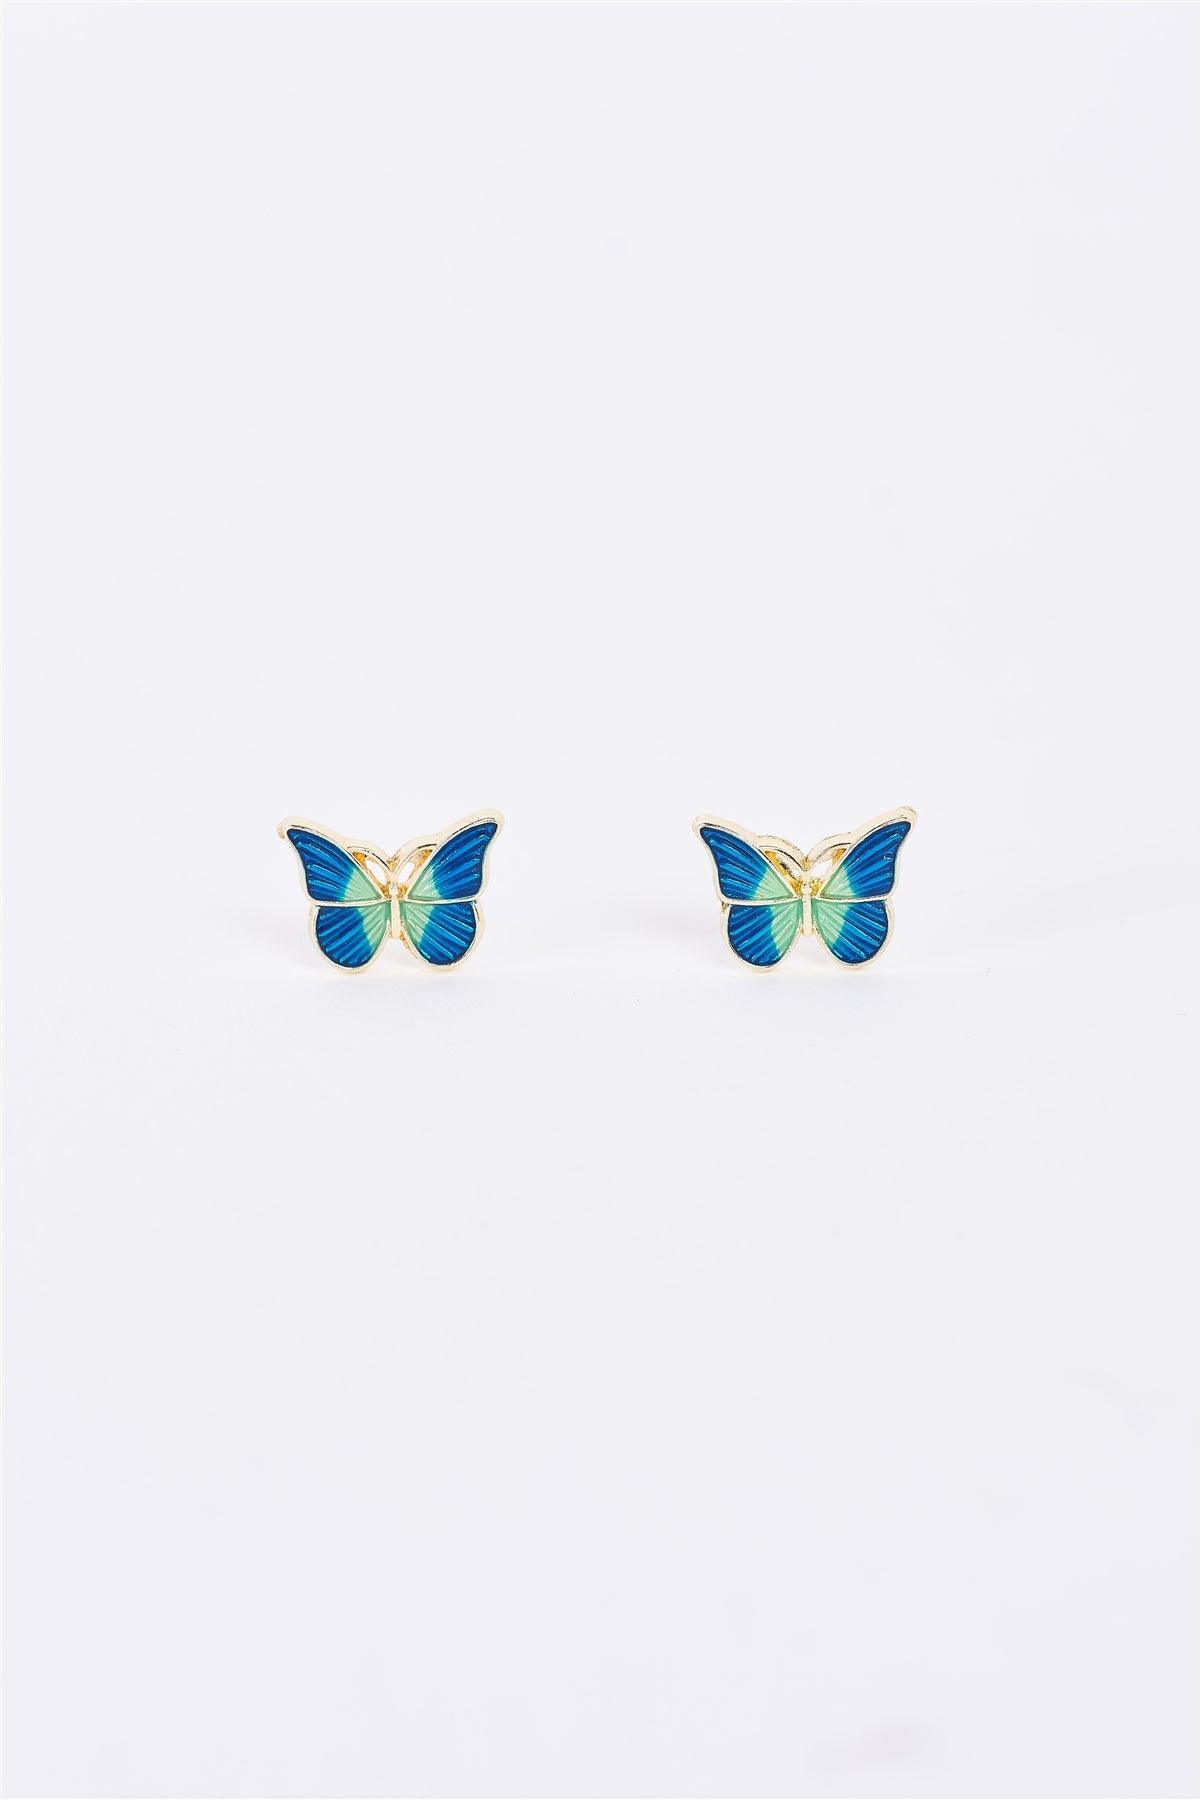 Gold & Blue Small Butterfly Stud Earrings /3 Pairs